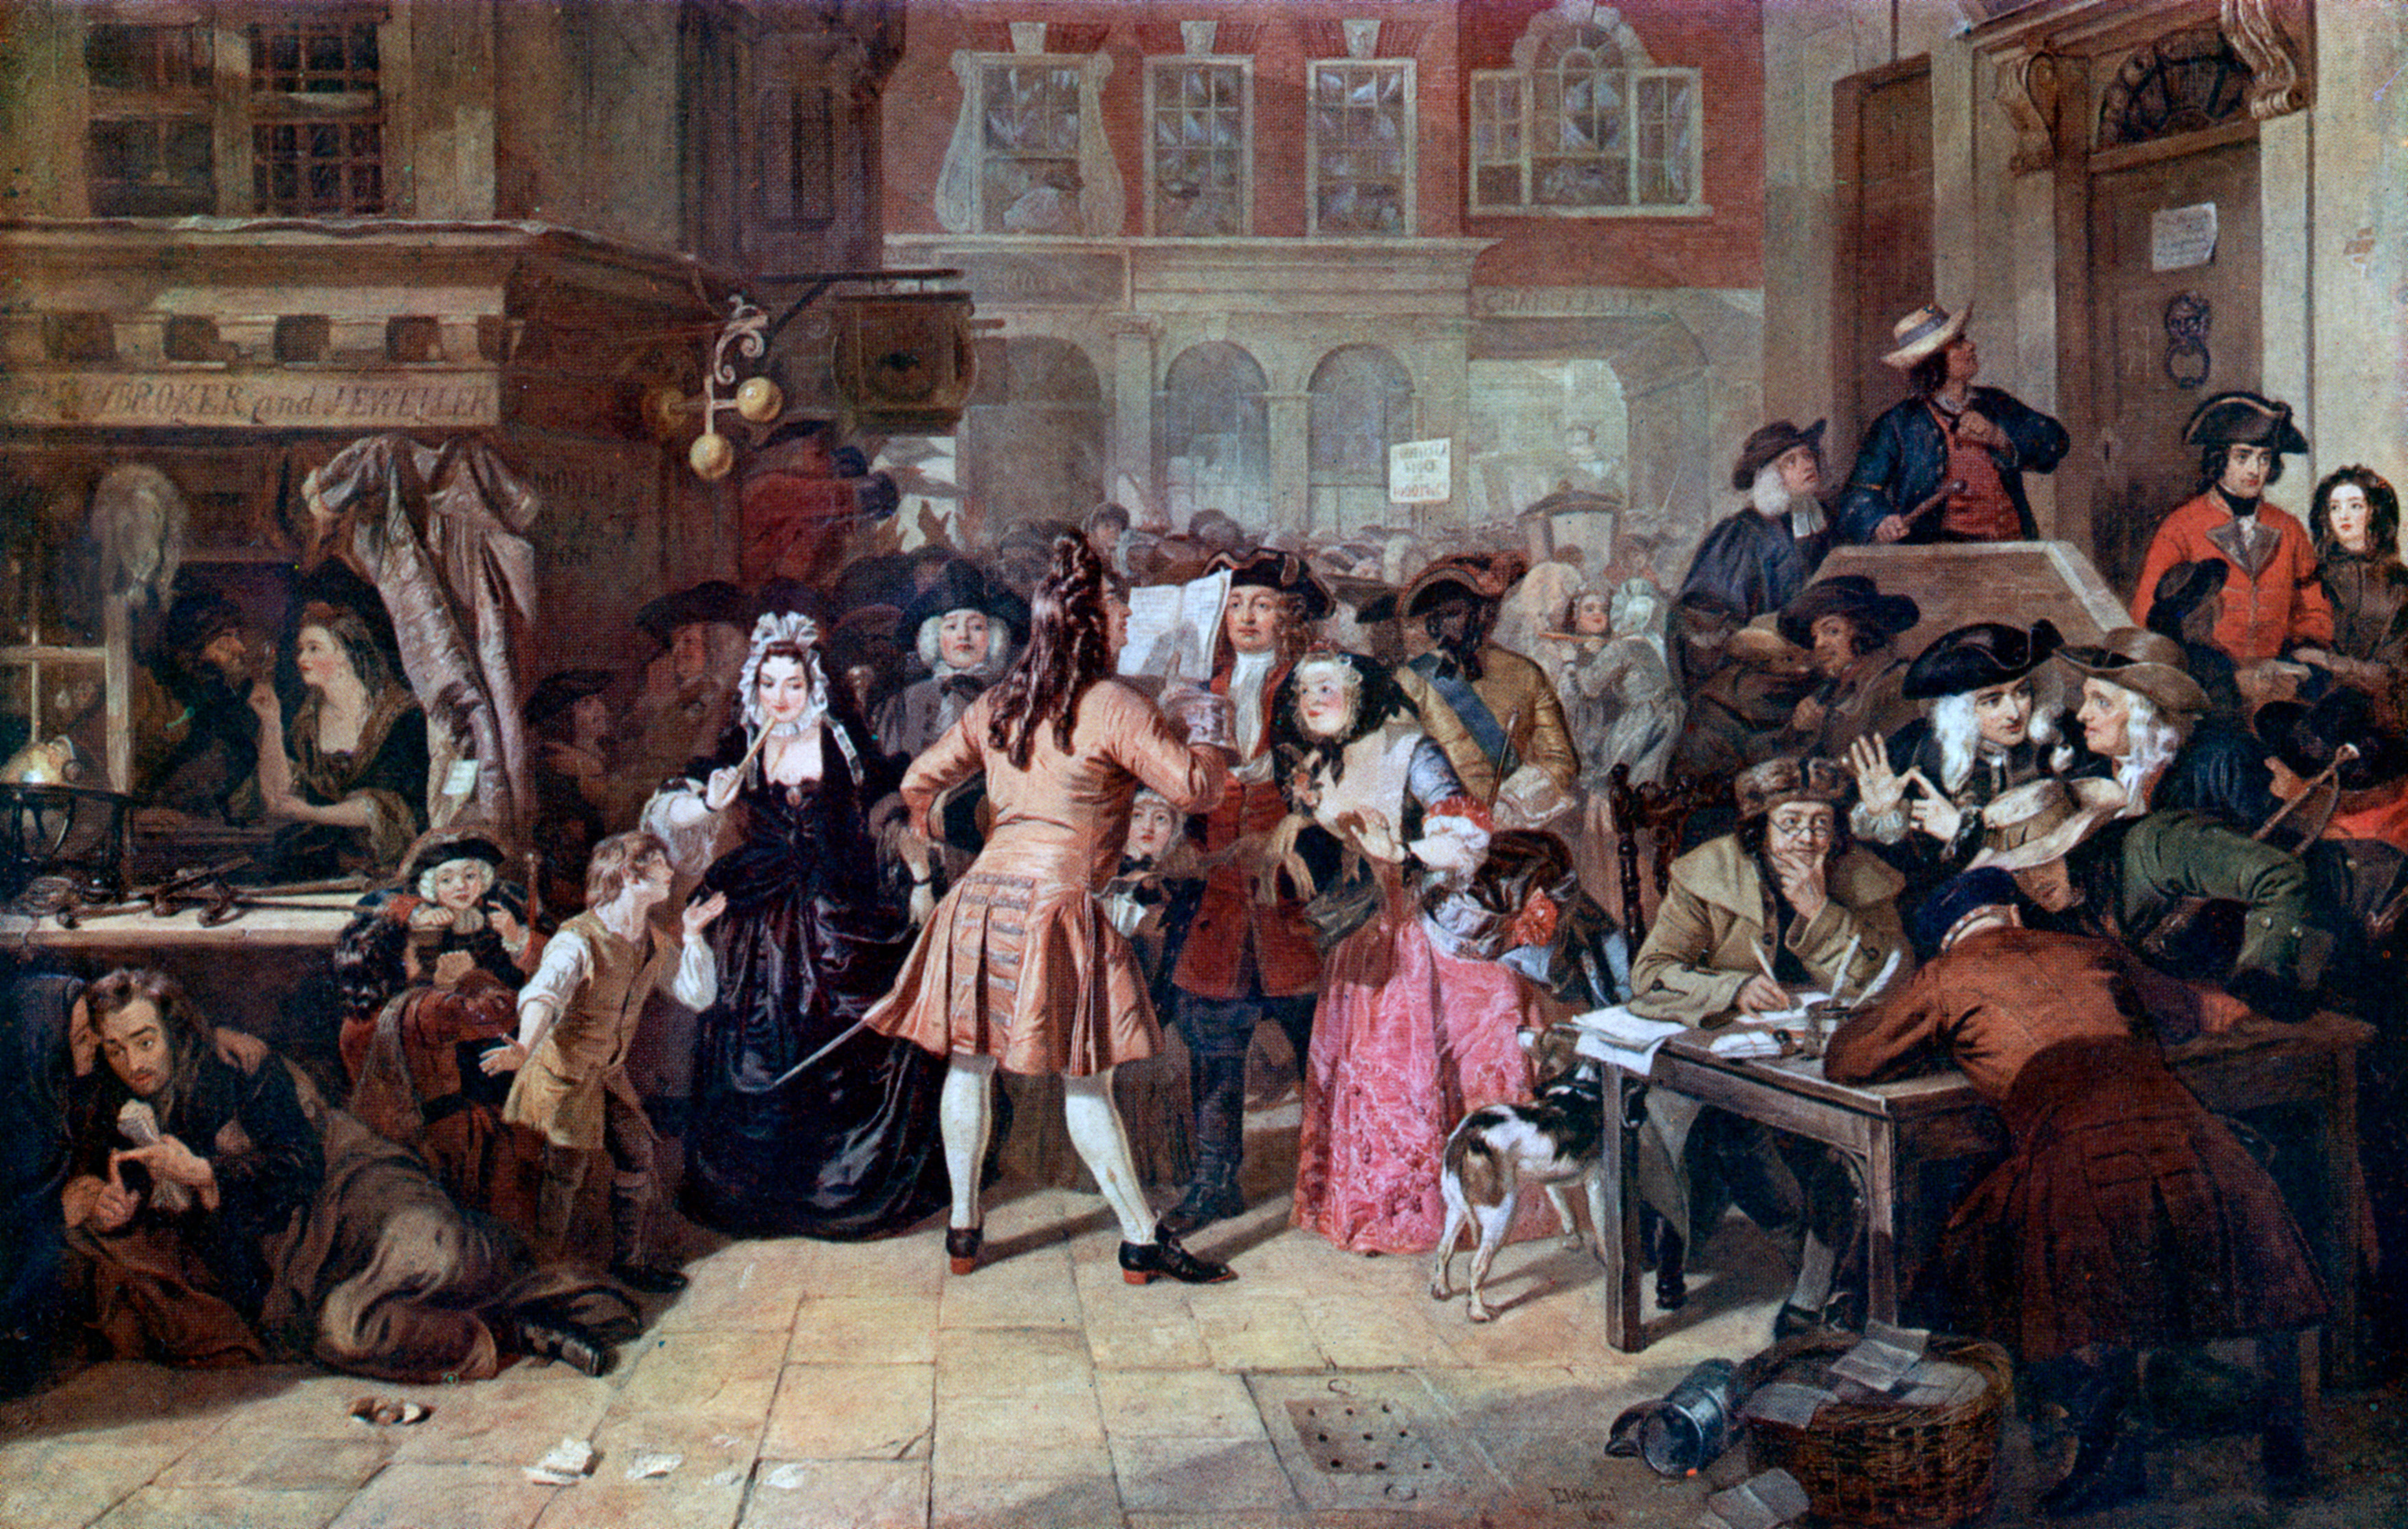 The South Sea Bubble, a Scene in 'Change Alley in 1720', 1847. By Edward Matthew Ward (1816-1879). Ward's famous oil painting of 1847 shows the speculation mania in early 18th century England which ended in the financial ruin of many of its investors.